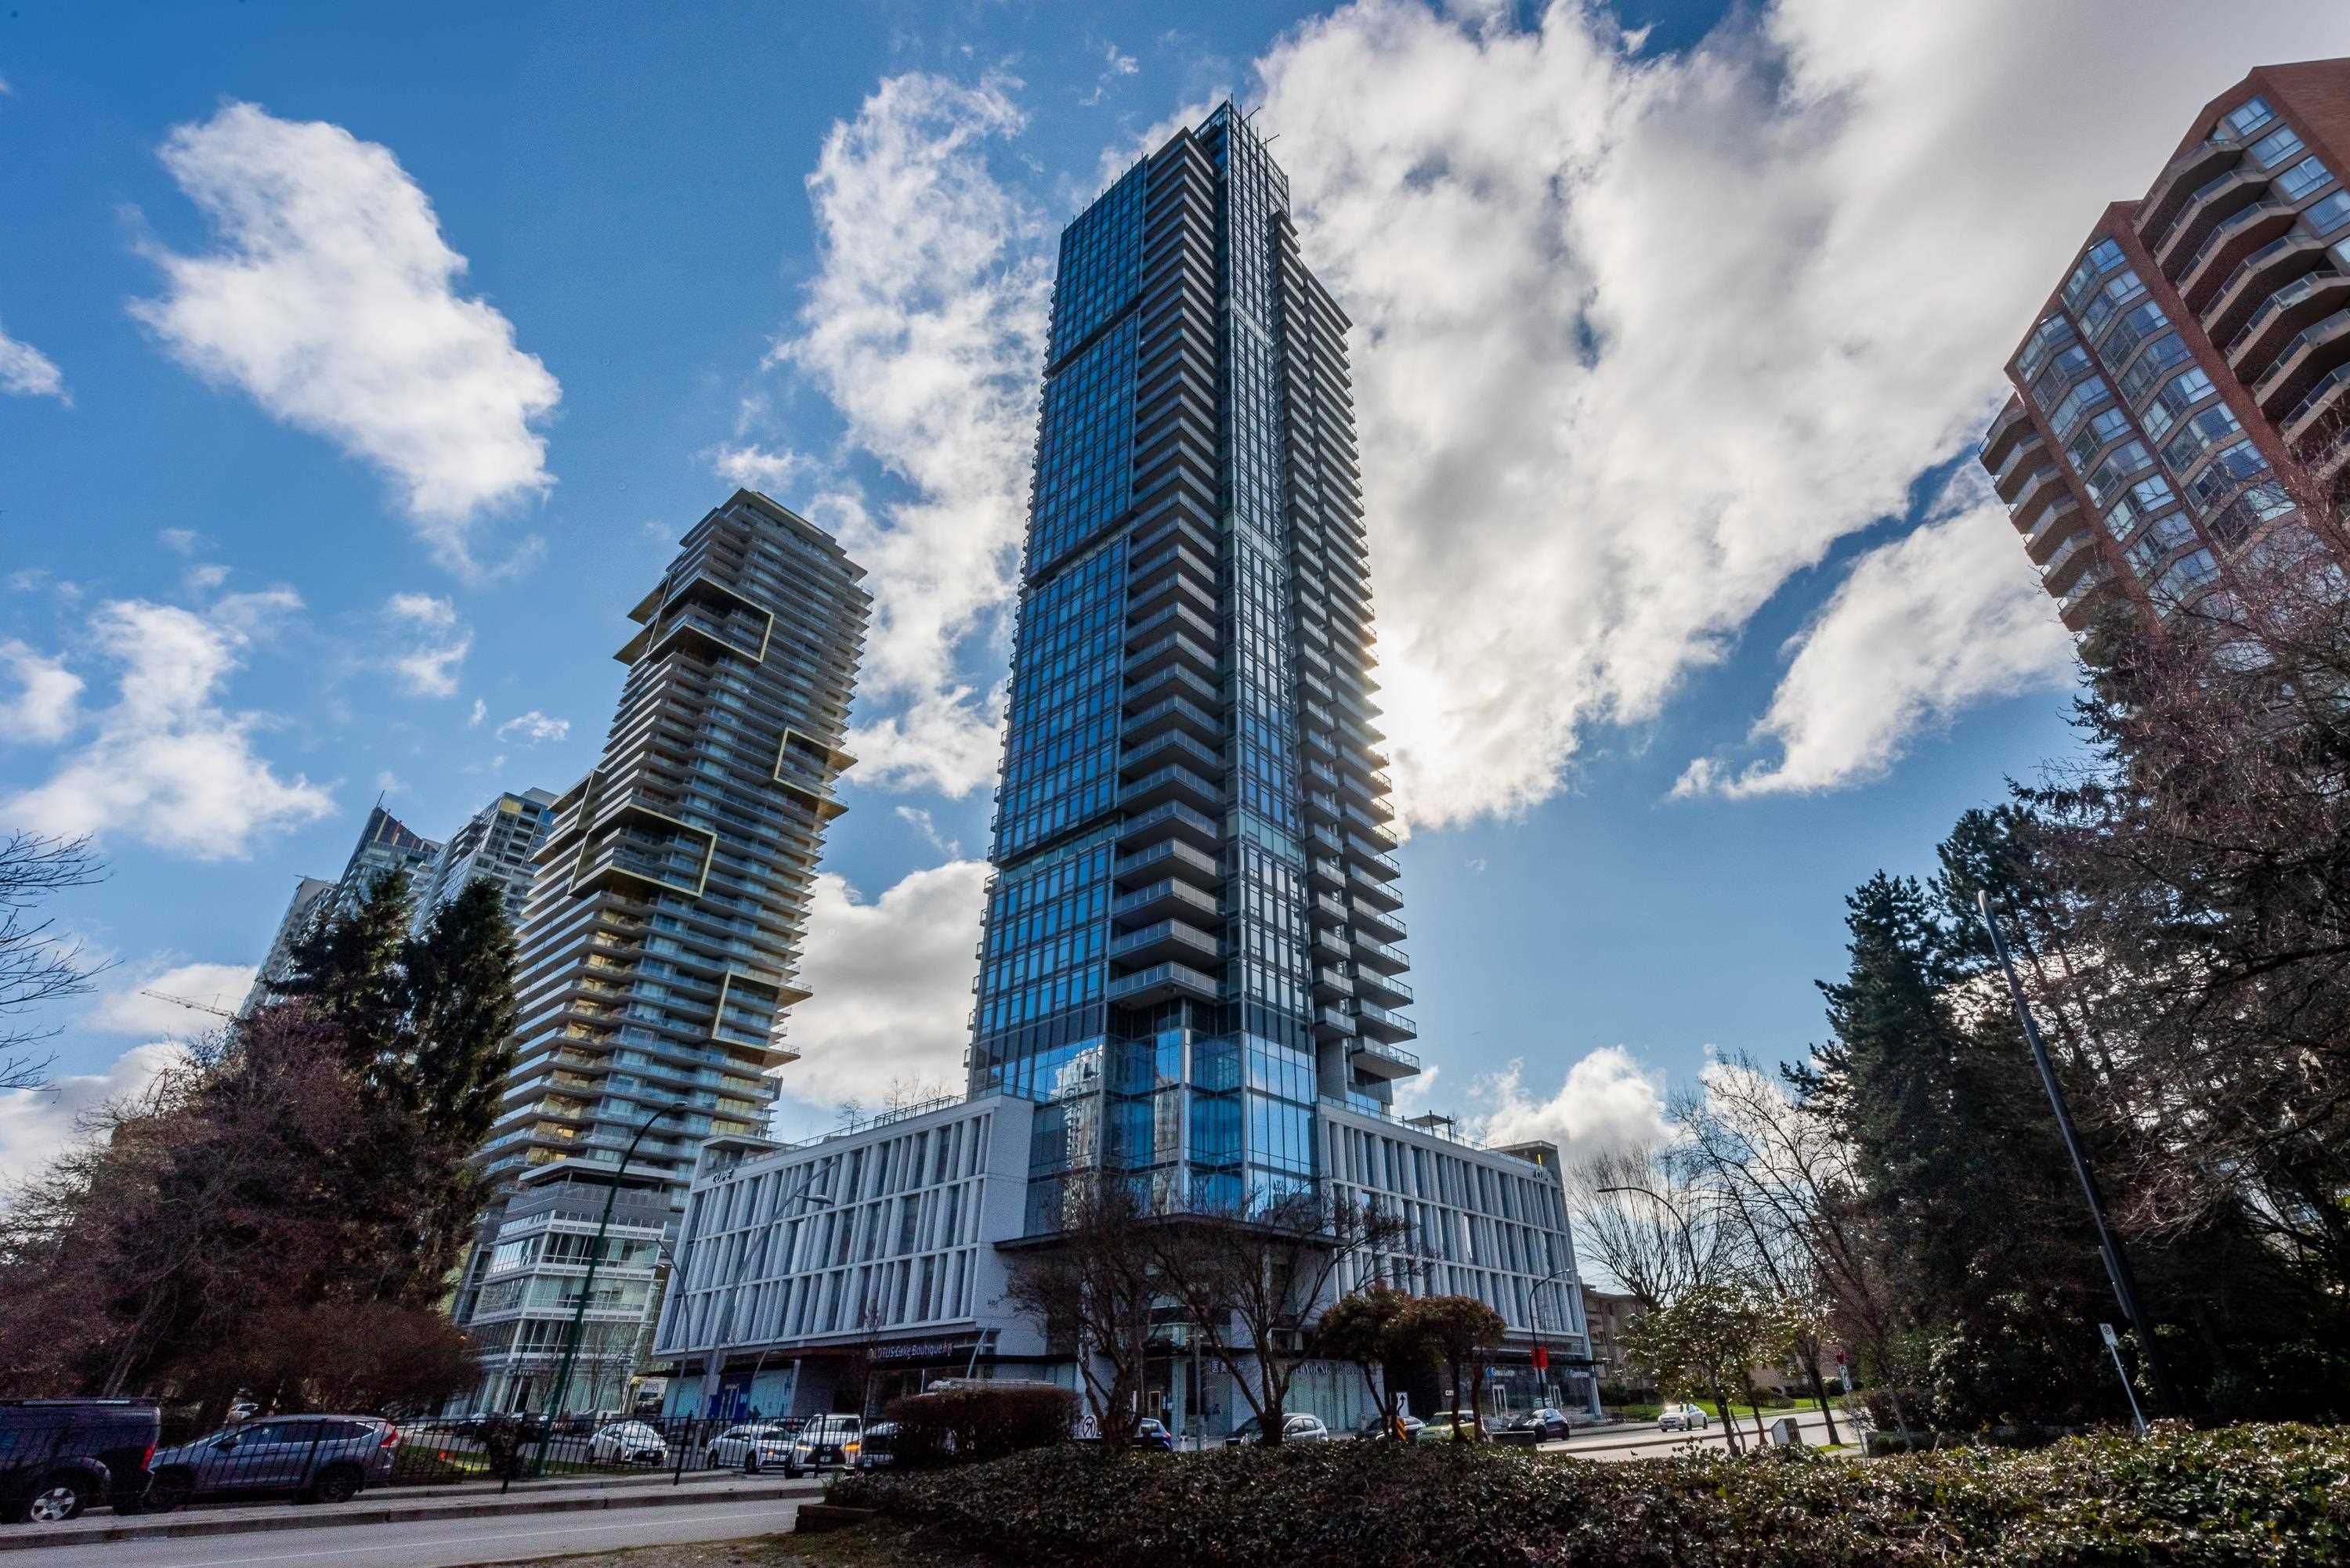 Main Photo: 2302 4360 BERESFORD Street in Burnaby: Metrotown Condo for sale (Burnaby South)  : MLS®# R2663712